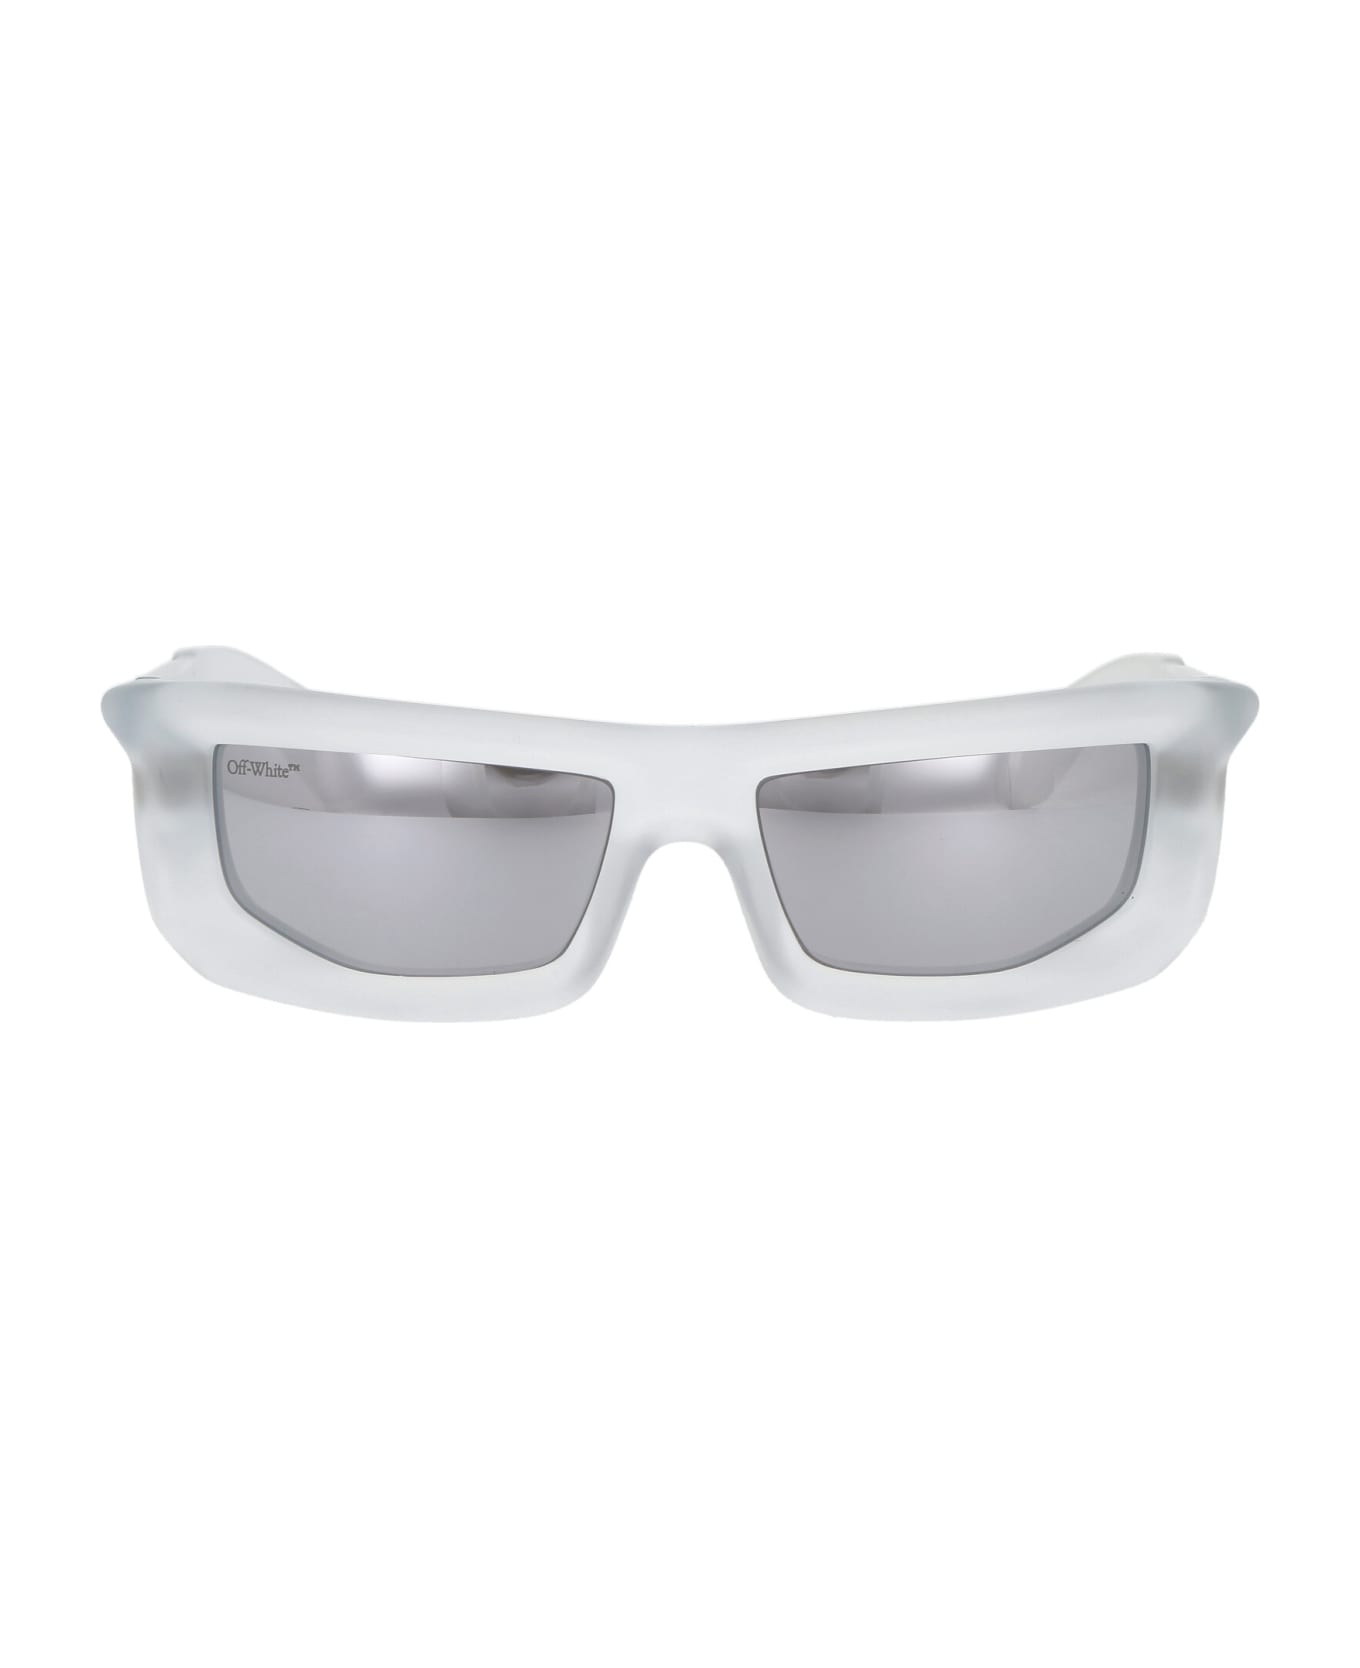 Off-White Volcanite Sunglasses - 0072 CRYSTAL MIR SILVER